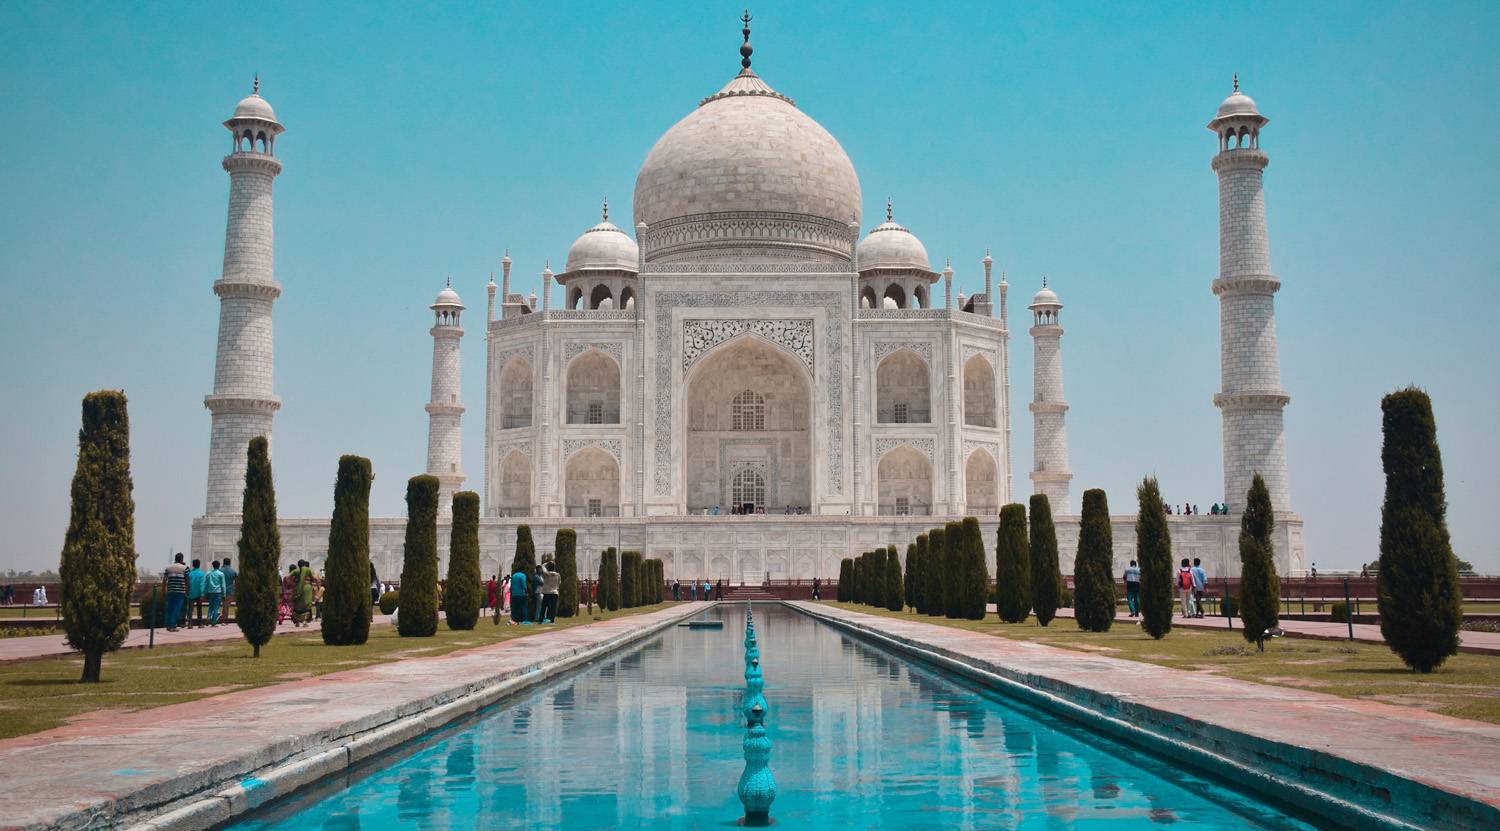 Experience the best Sunrise Taj Mahal Tour by car from Delhi to Agra.